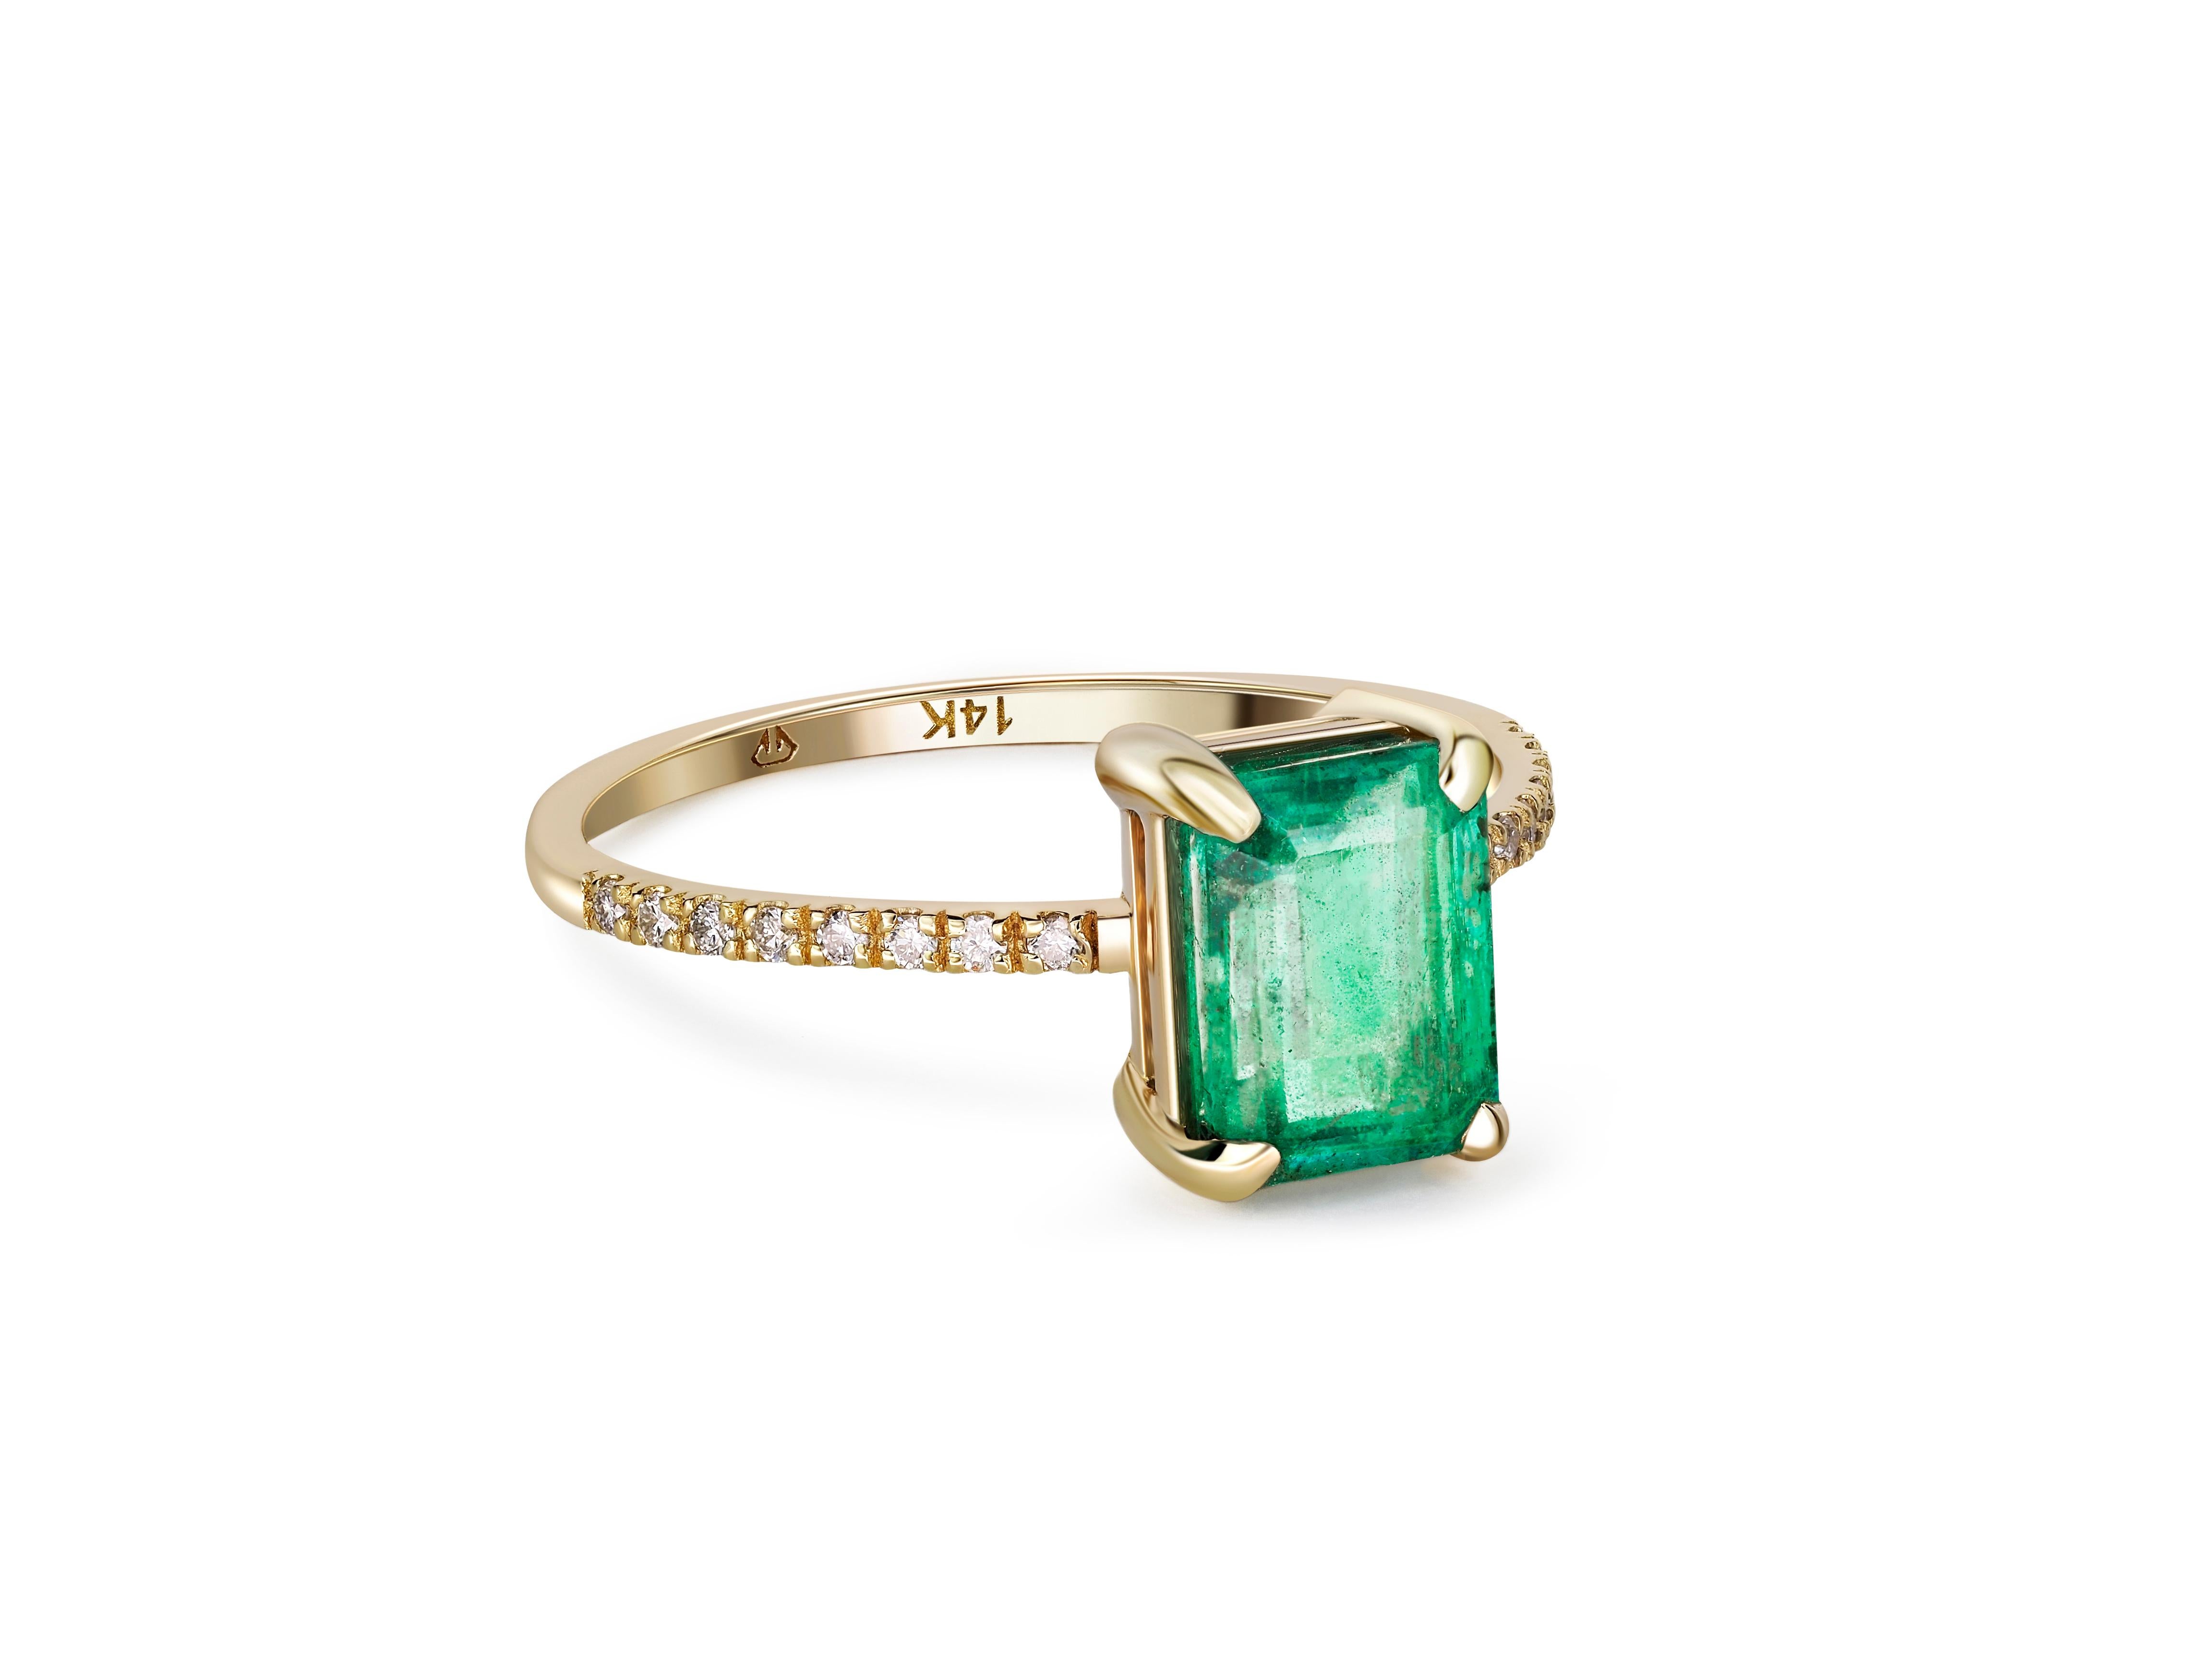 Emerald ring in 14 k gold. 
Emerald gold ring. Real emerald ring. Emerald ring for women. Dainty emerald ring. Emerald cut ring. 

Metal: 14k gold
Weight: 1.97 g. depends from size.

Set with emerald, color - light green 
Emerald cut, aprox 0.7